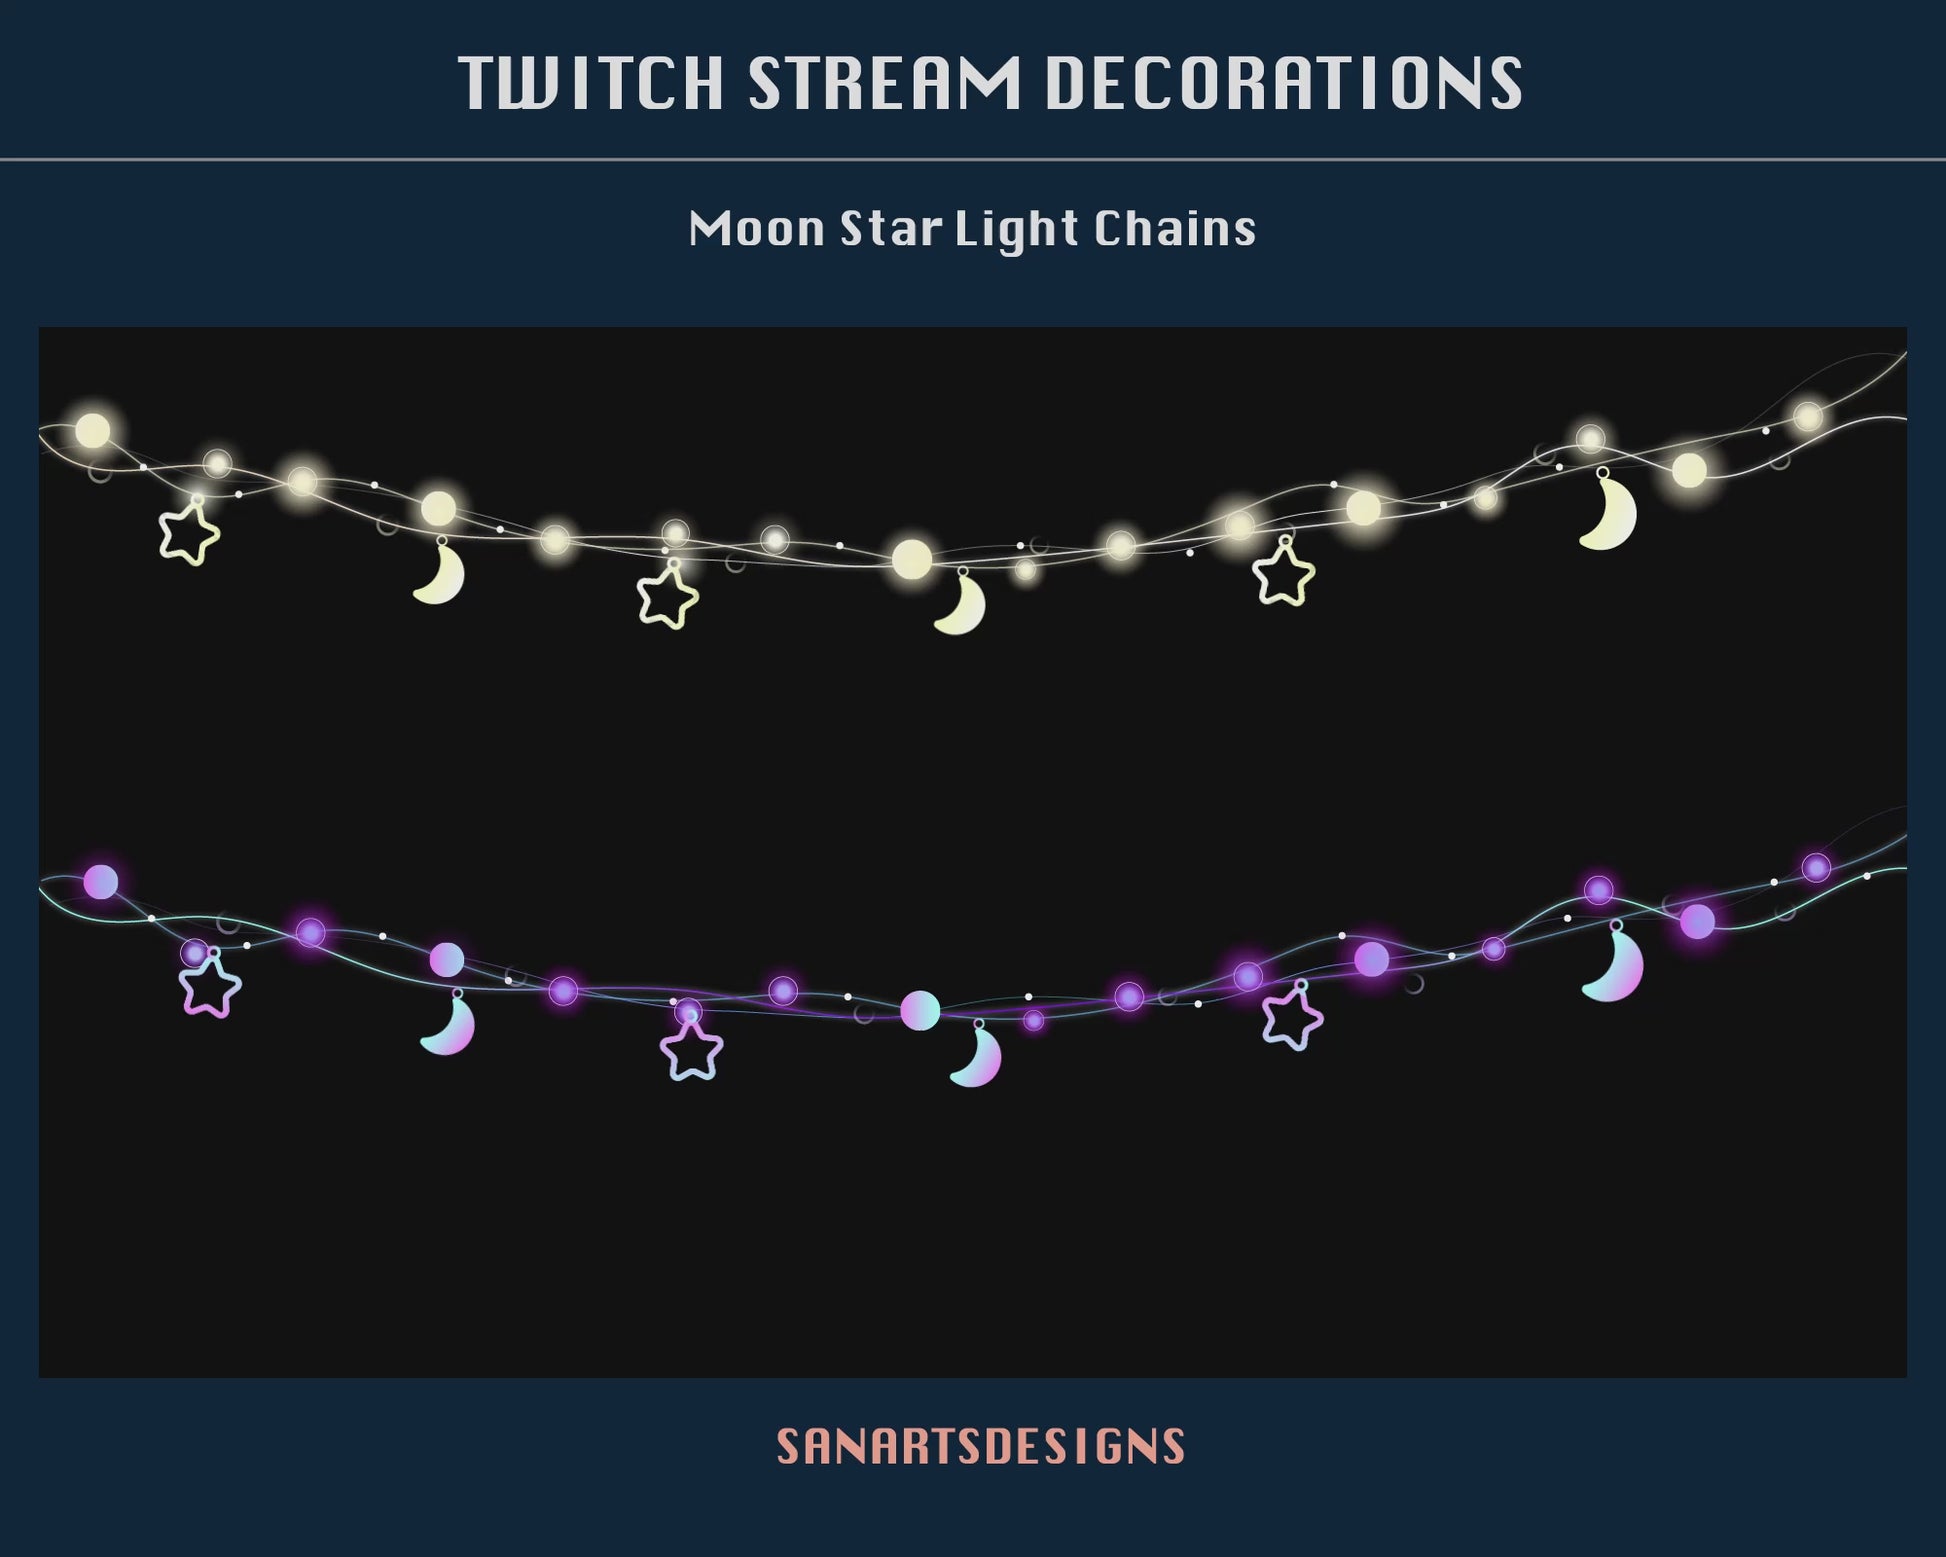 Moon Star Light Chains Animated Stream Decorations